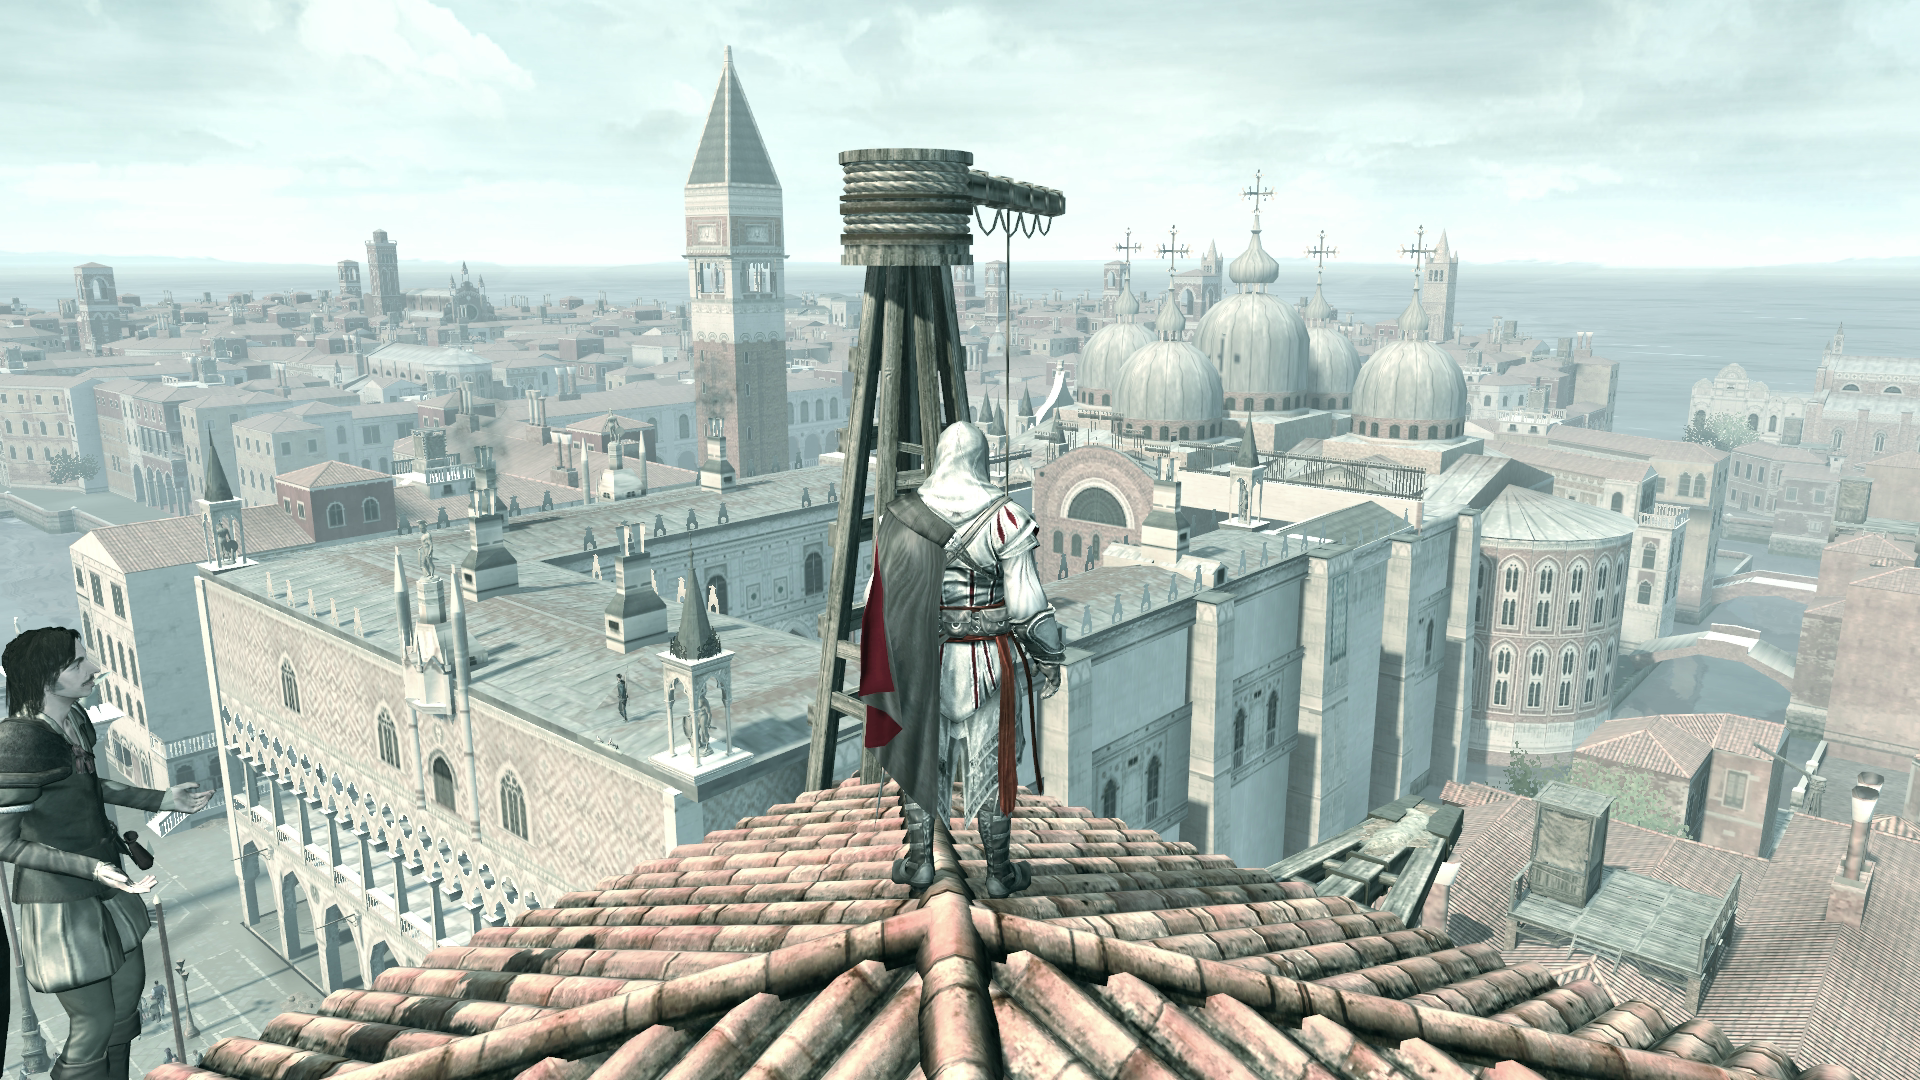 12 Years ago today (11/13/2007) the first Assassin's Creed came out! I know  that right now the franchise is in a bit of turmoil, but it's neat to think  that whatever our